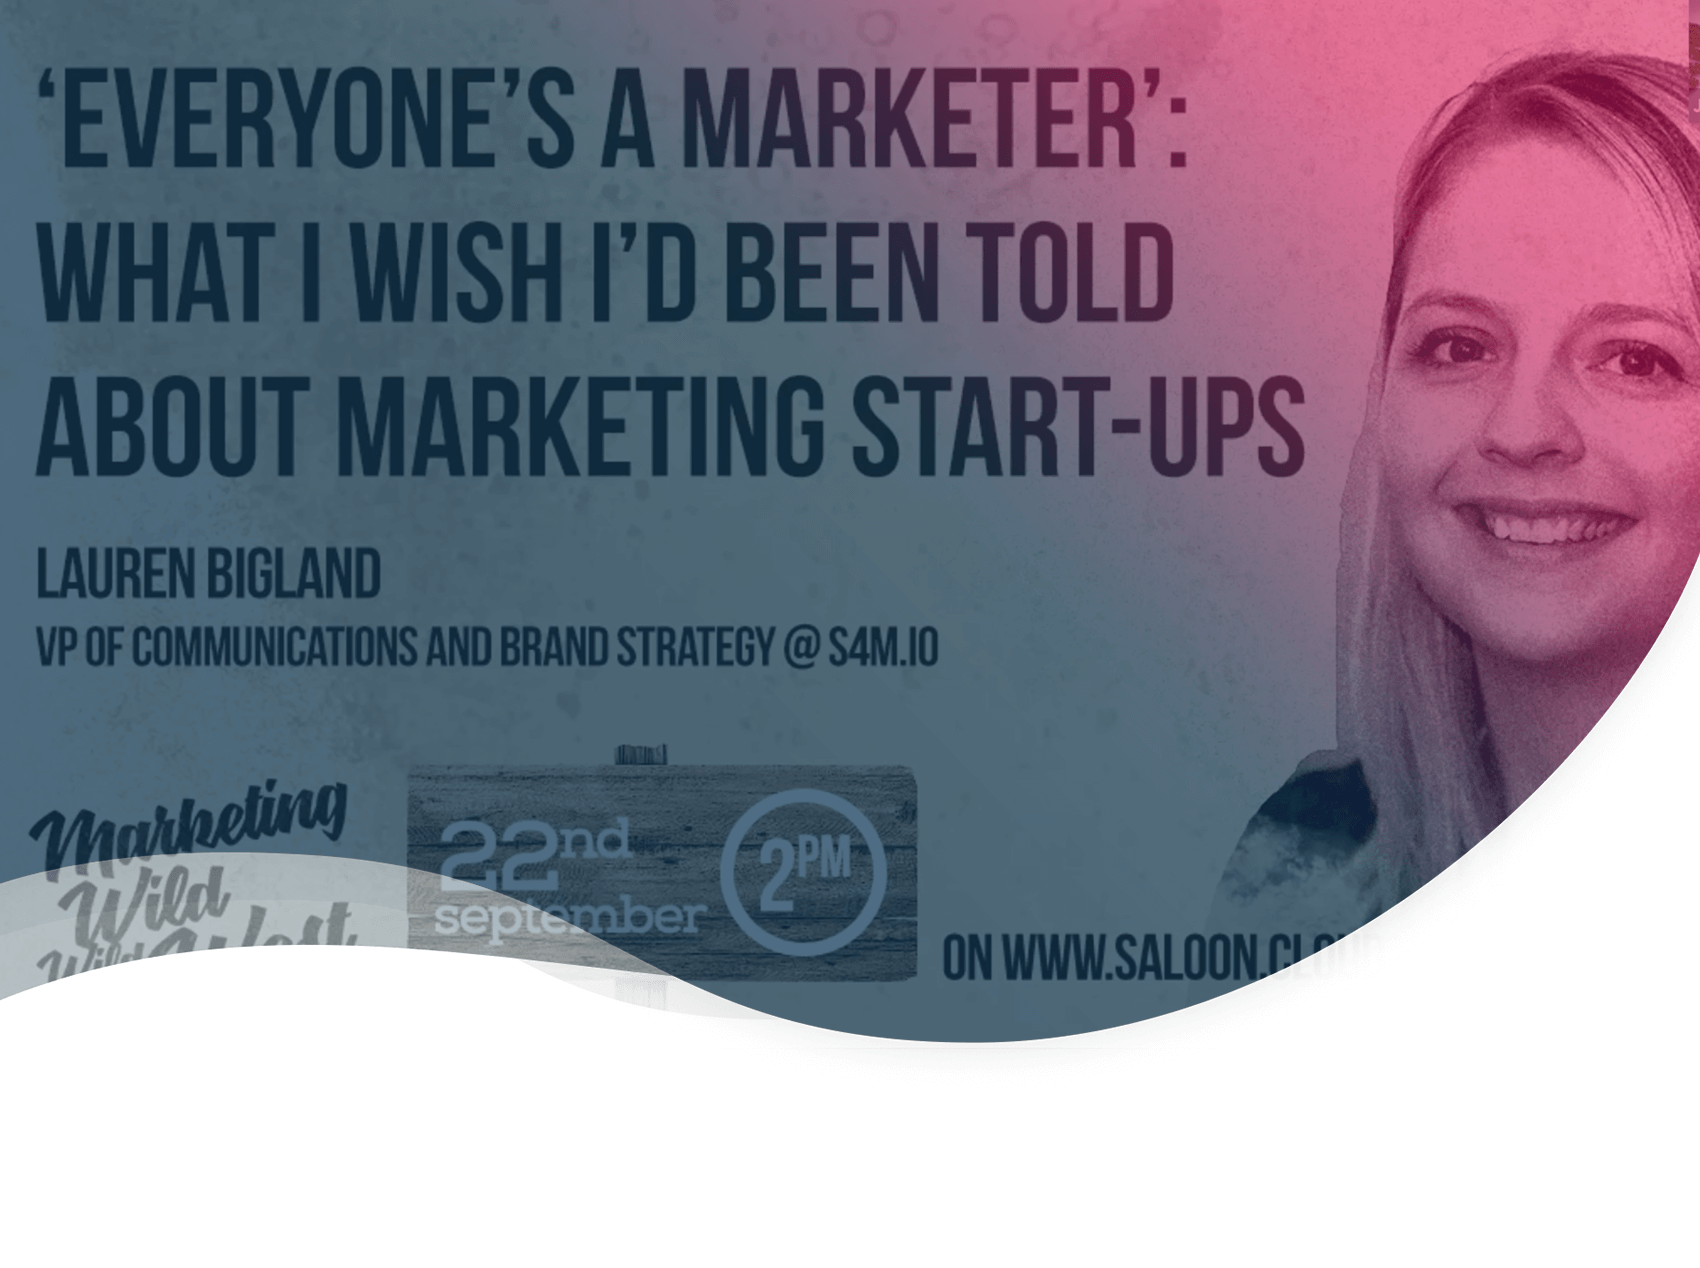 10 tips for any marketer starting out in a B2B startup, by Lauren Bigland of S4M